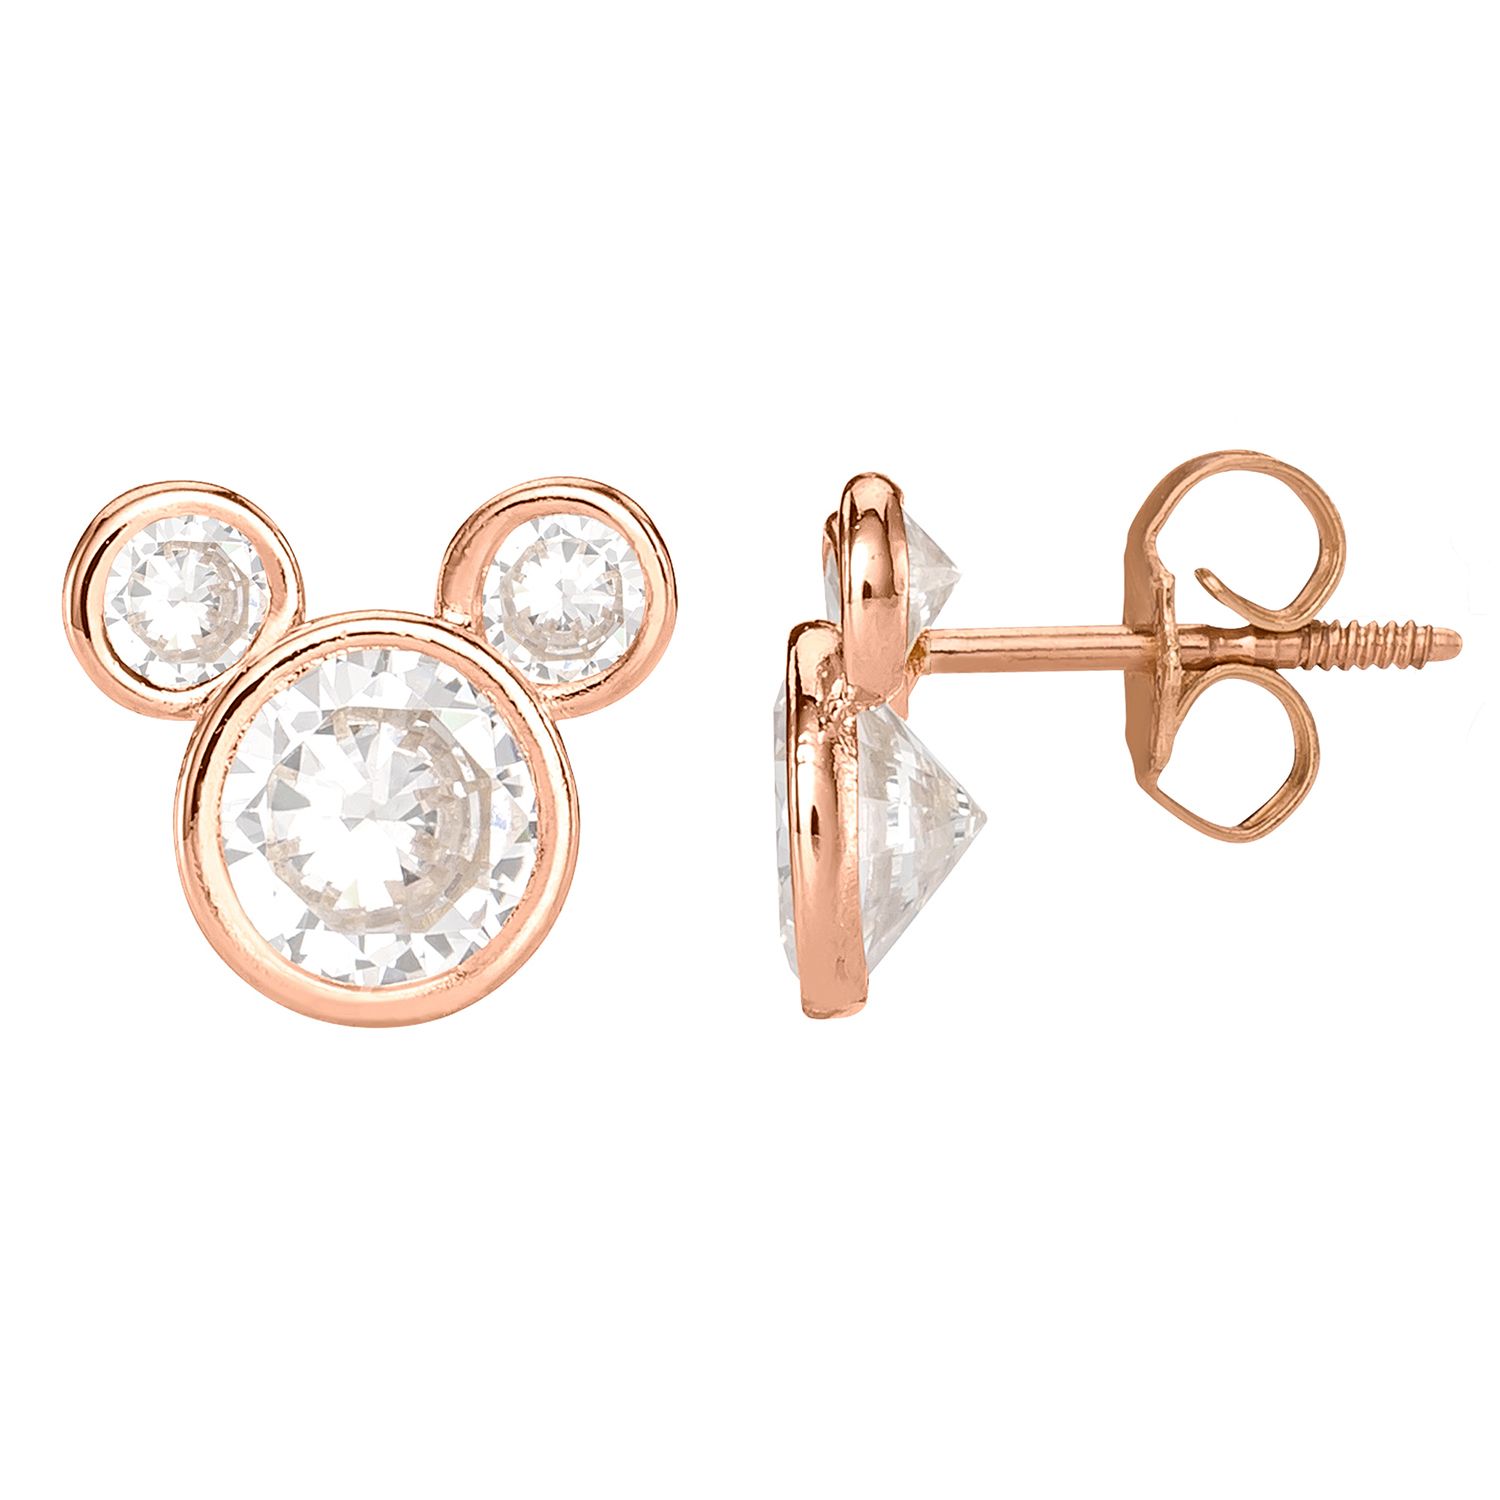 Image for Disney 's Mickey Mouse 10k Rose Gold Cubic Zirconia Stud Earrings at Kohl's.